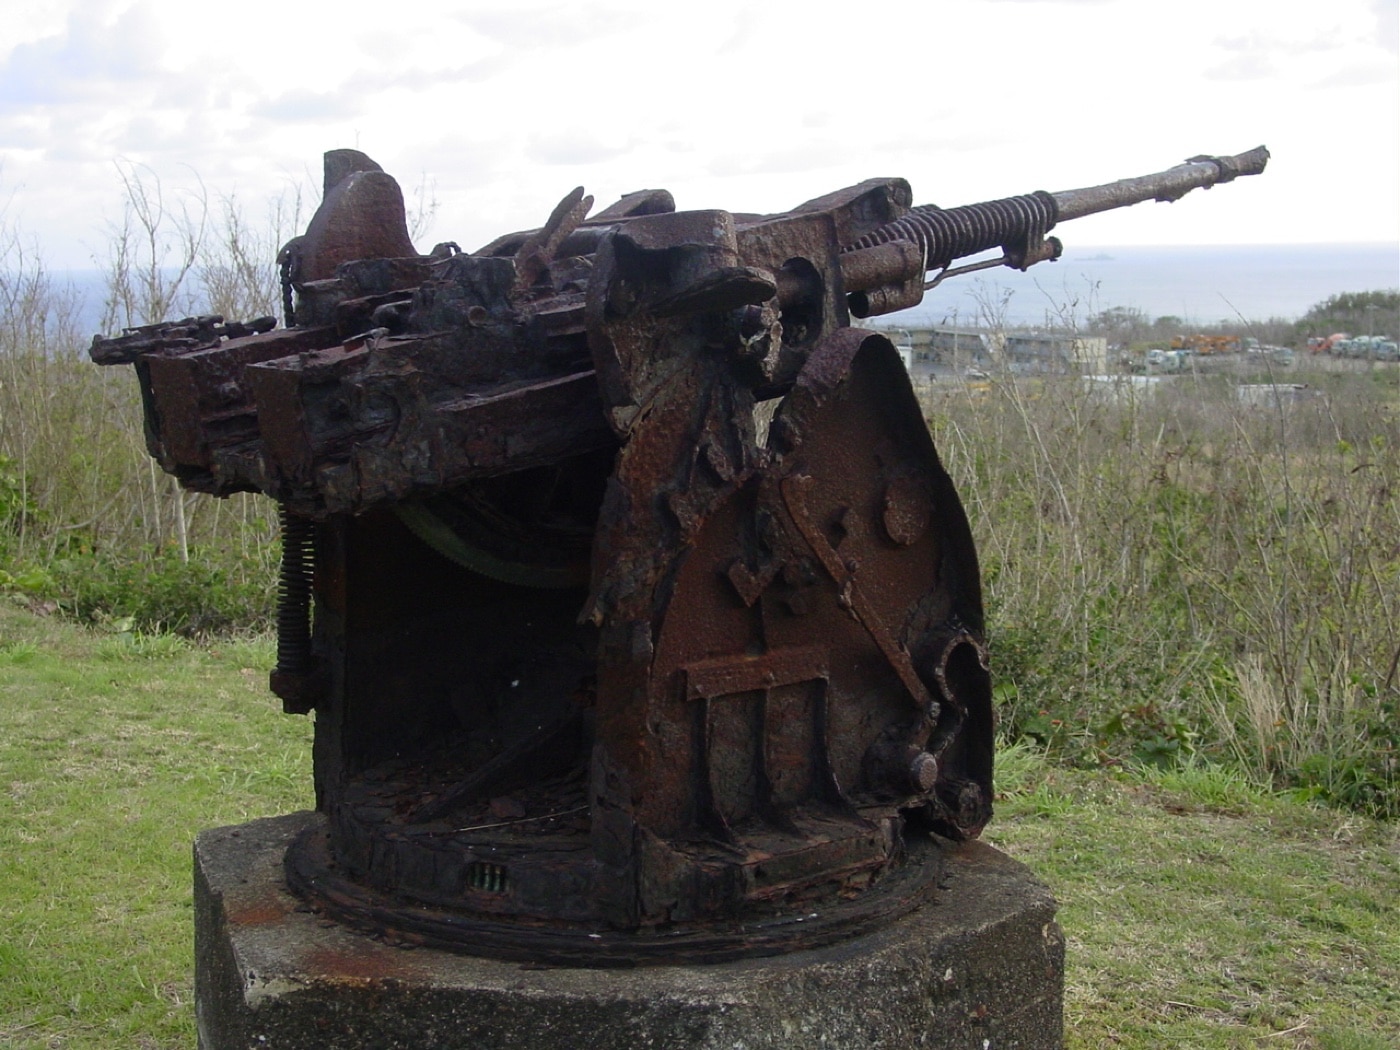 Here we see a Japanese anti-aircraft gun emplacement on the island. The gun also worked as an anti-tank gun. It was a variation of a French Hotchkiss design. 